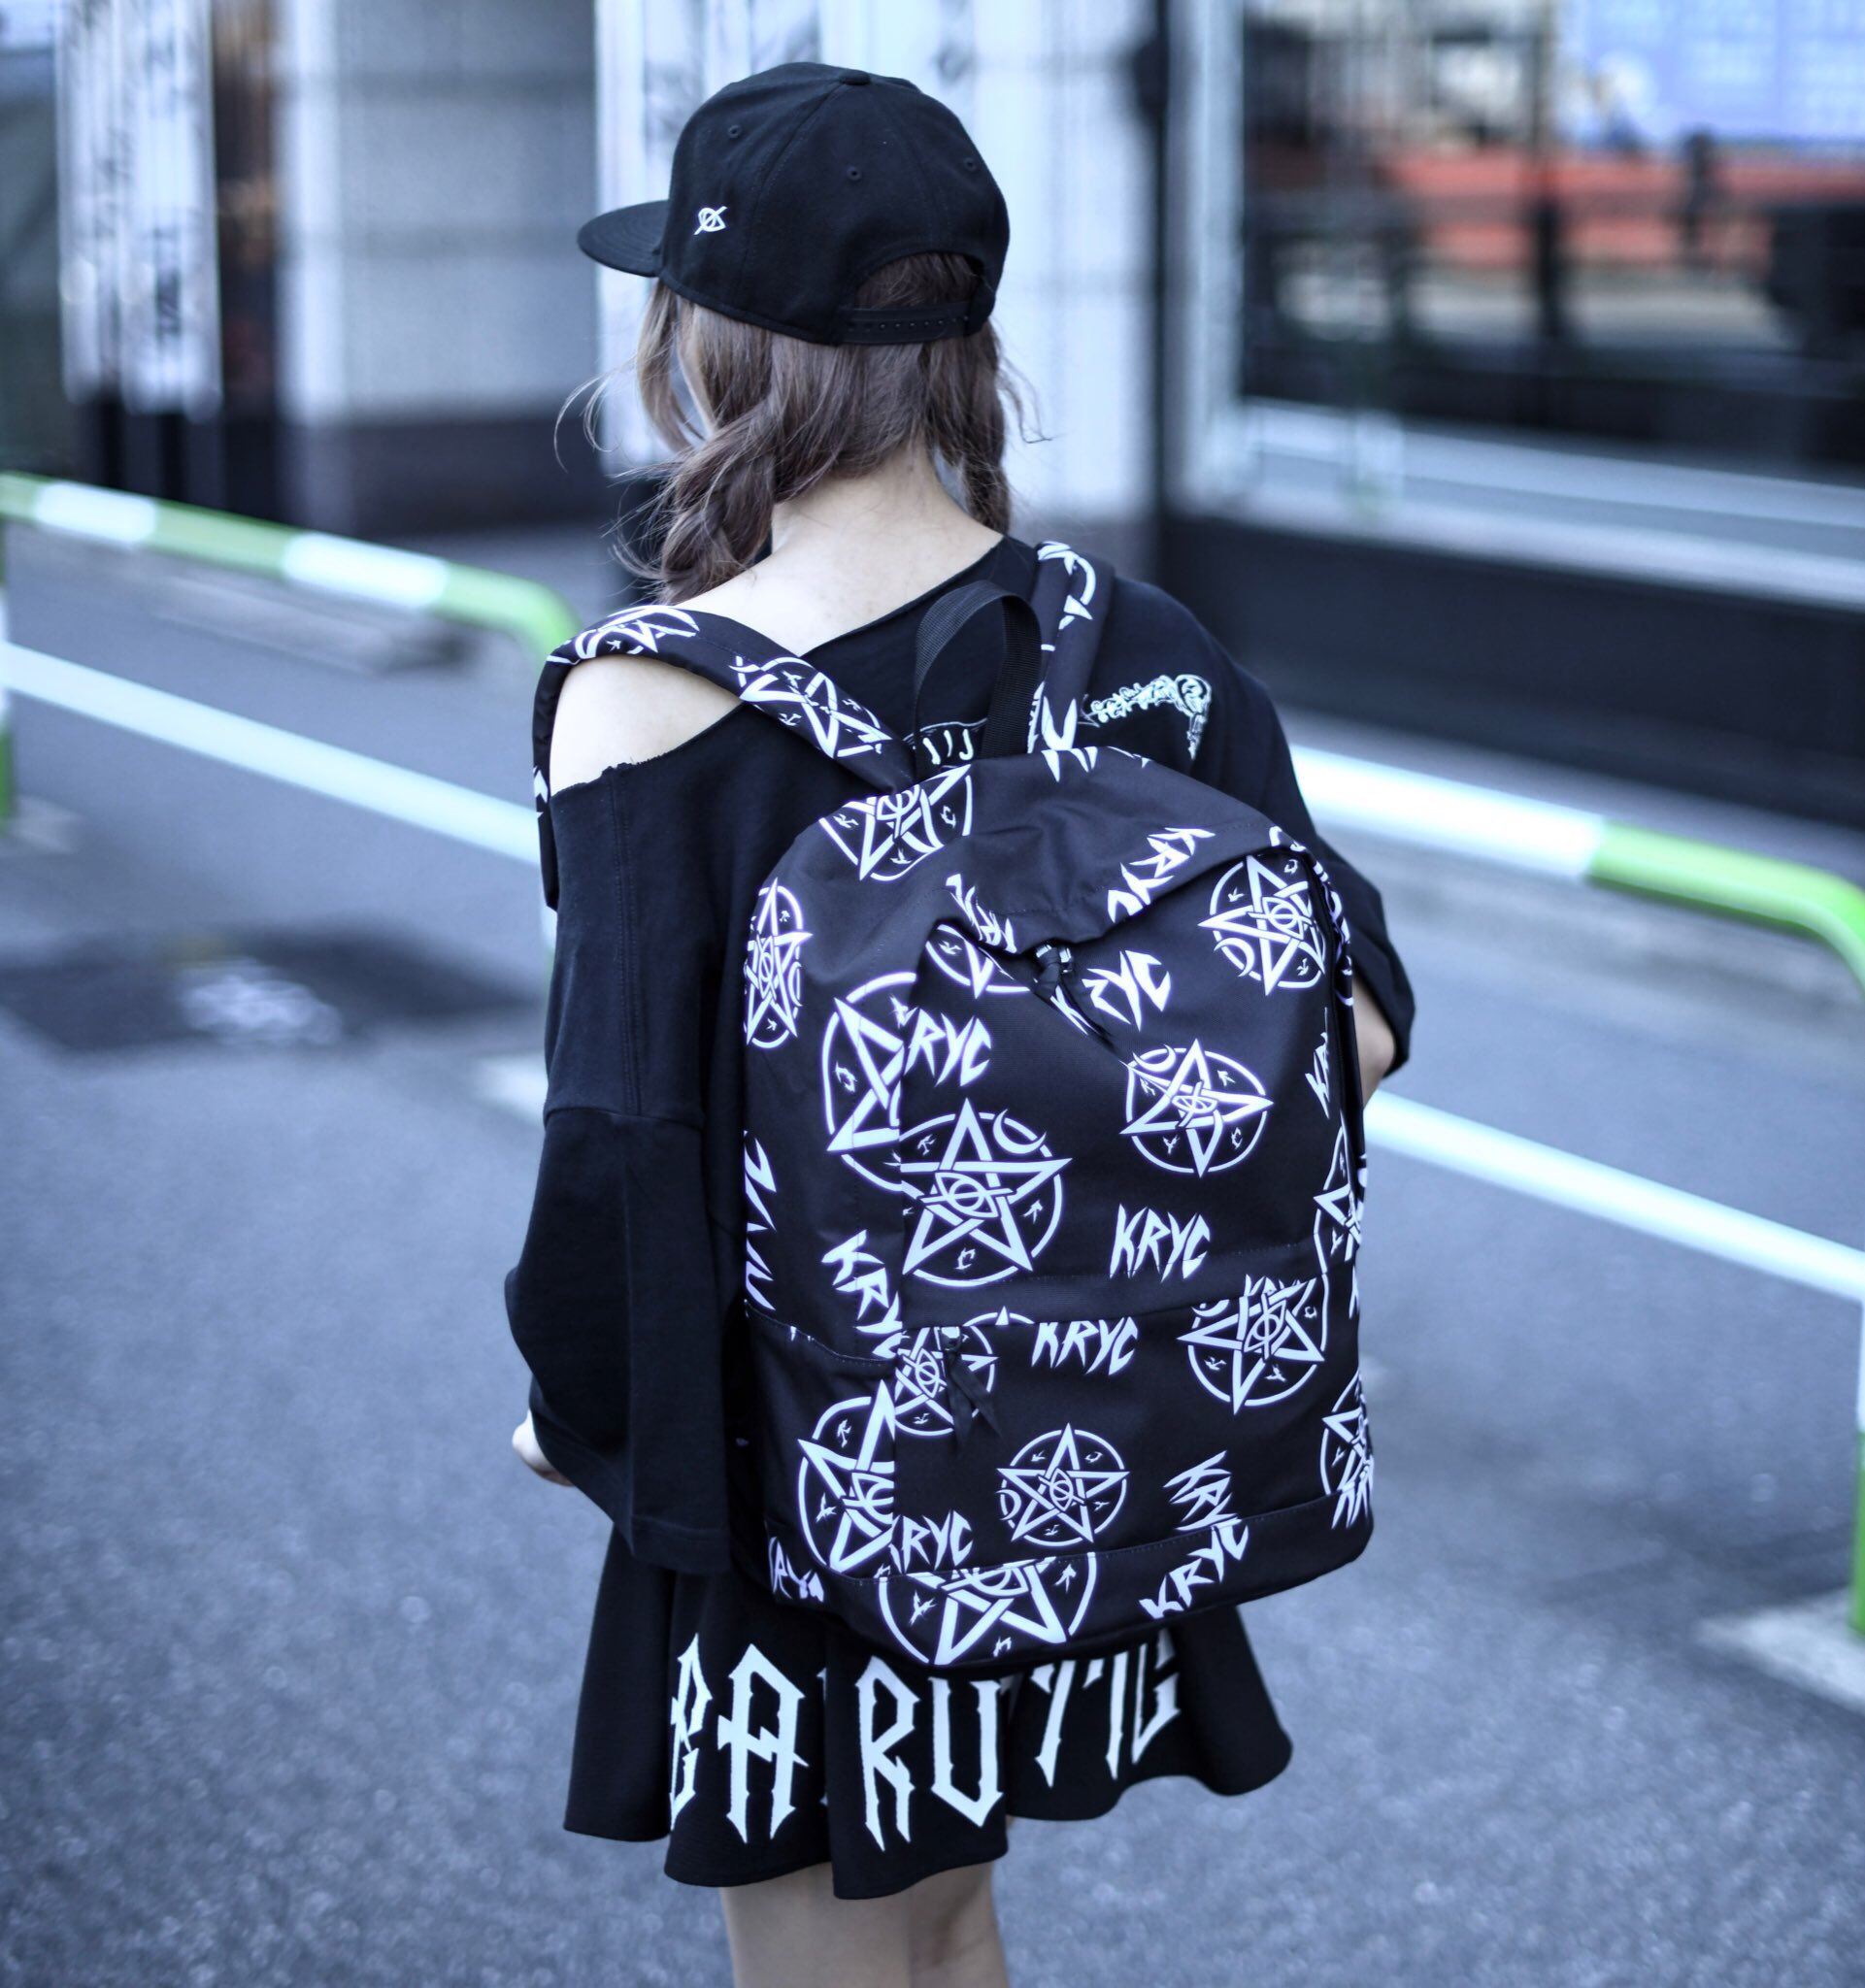 KRYclothing on X: "総柄BACKPACK https://t.coqM5yXI6Dl https